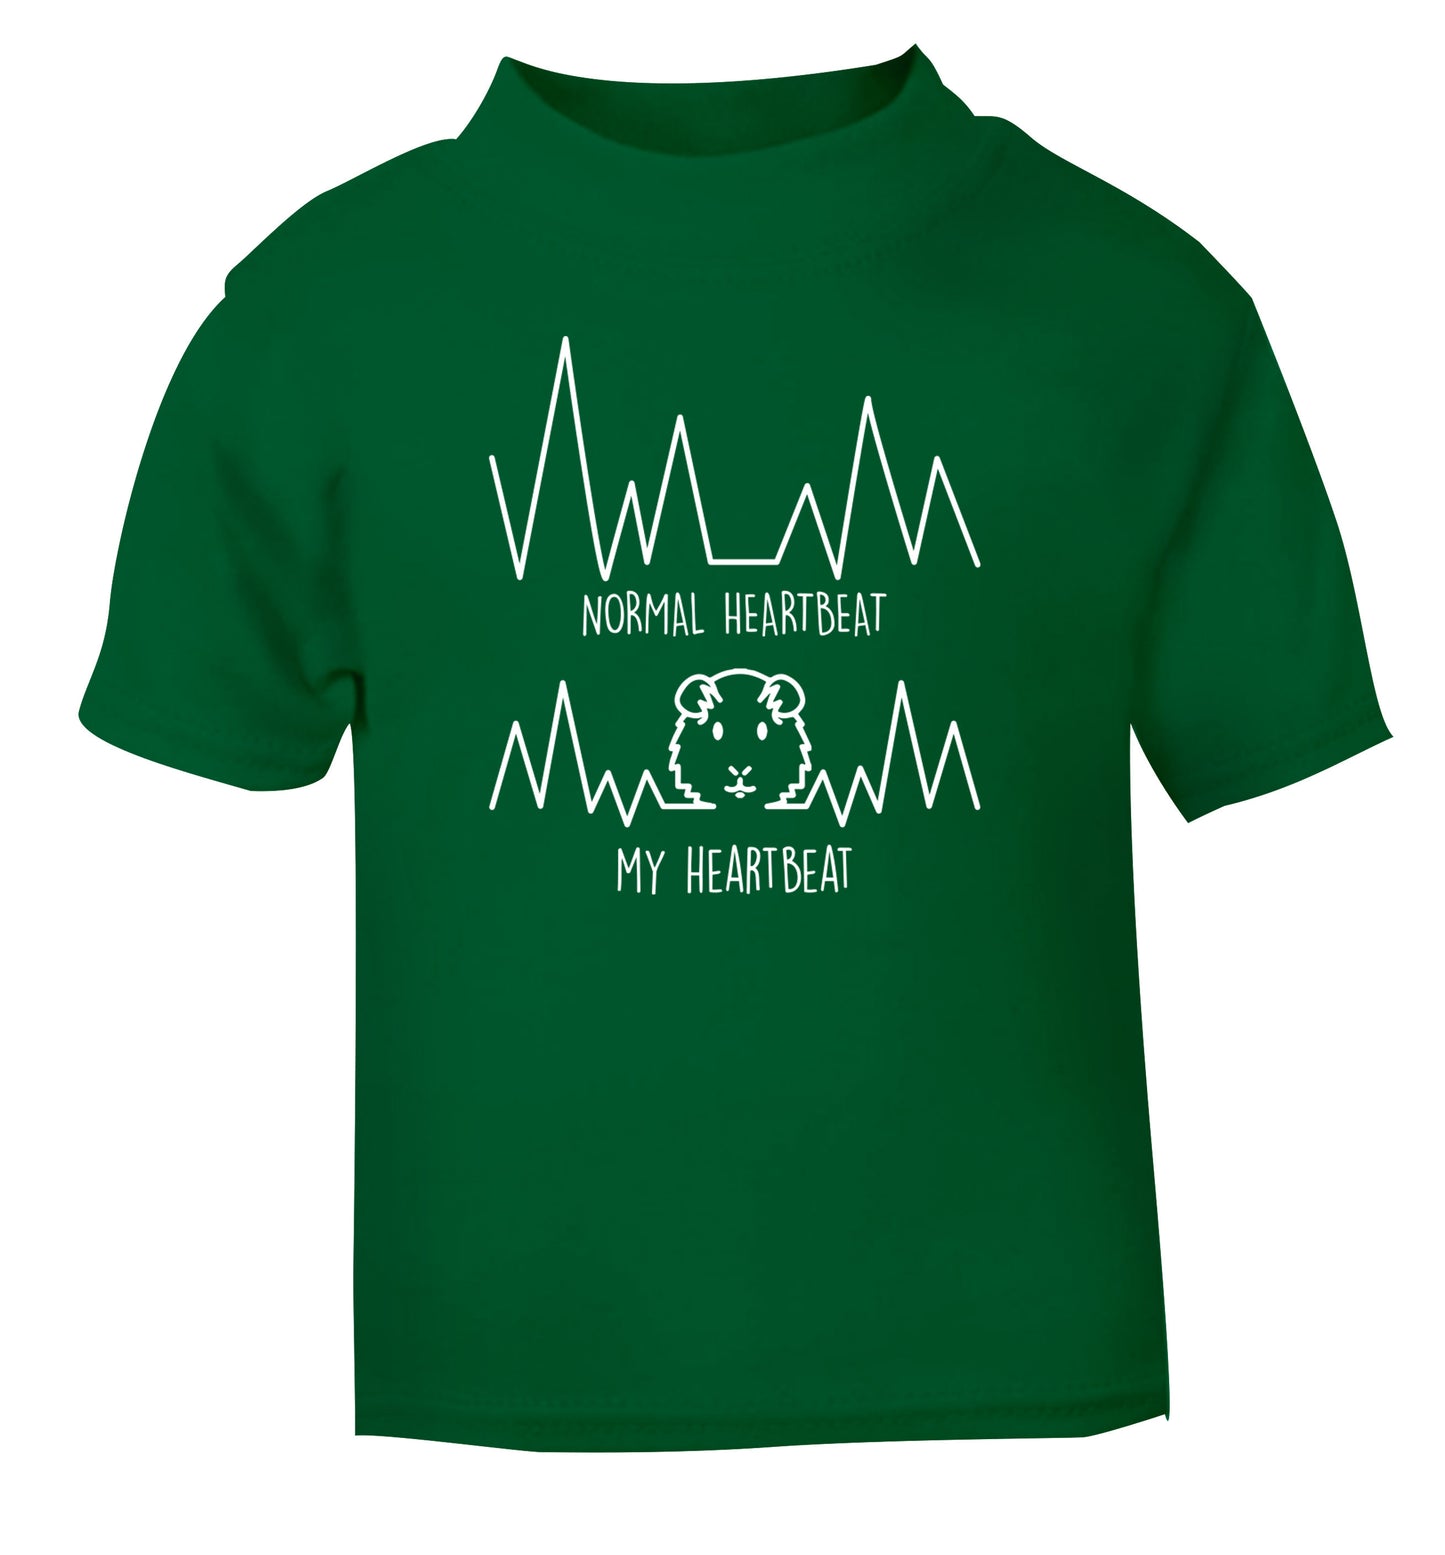 Normal heartbeat vs my heartbeat guinea pig lover green Baby Toddler Tshirt 2 Years